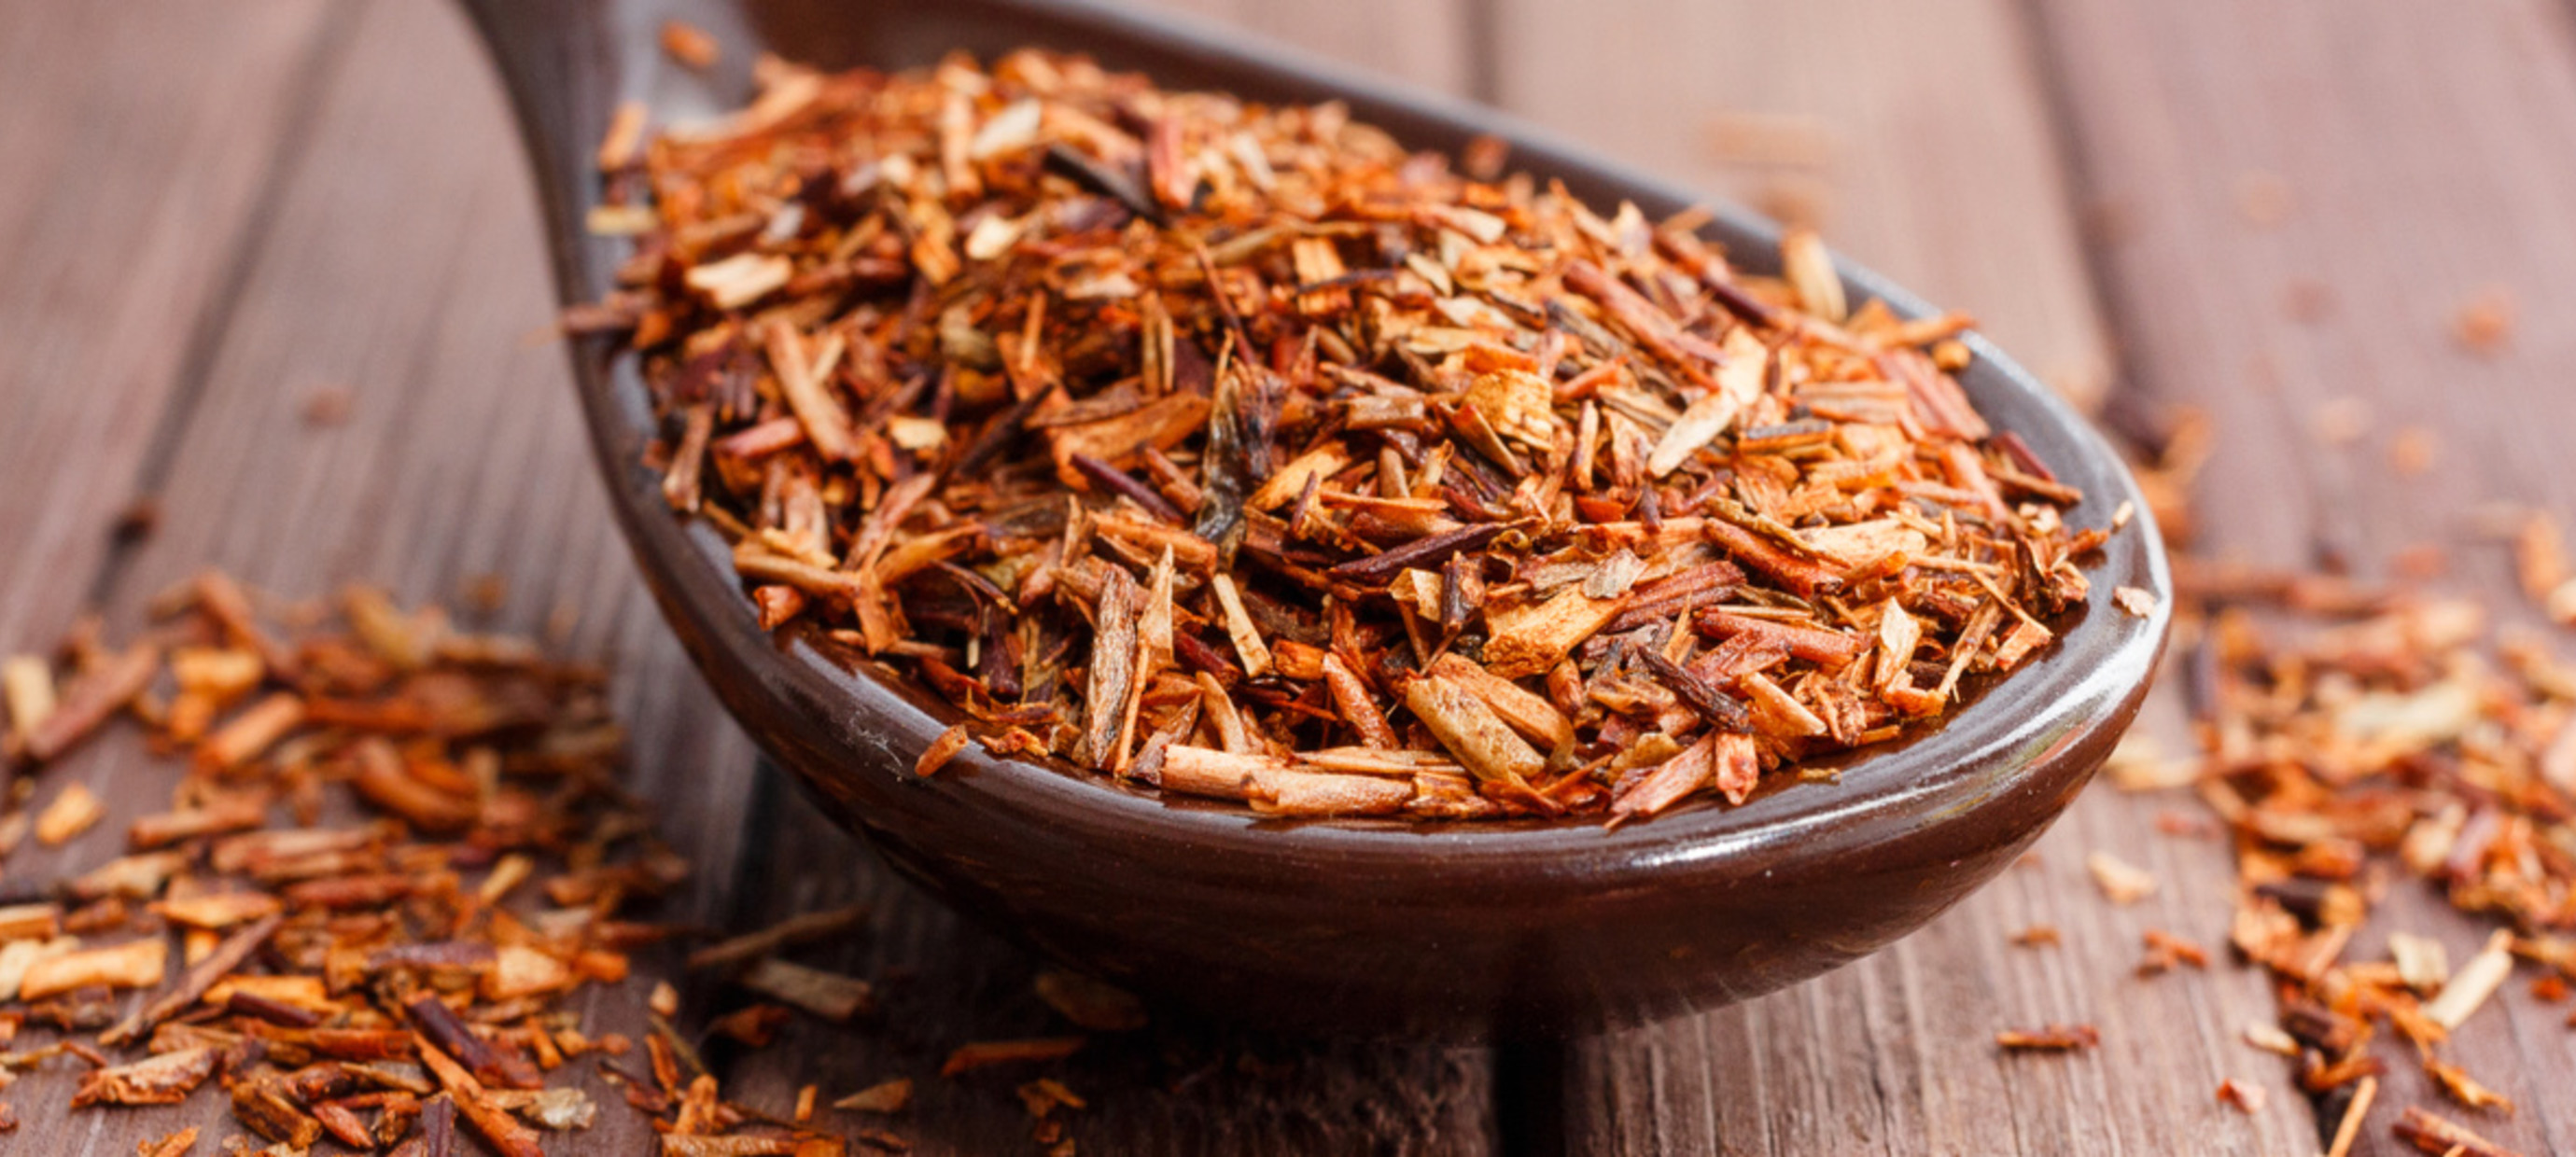 Five reasons to drink rooibos tea more often